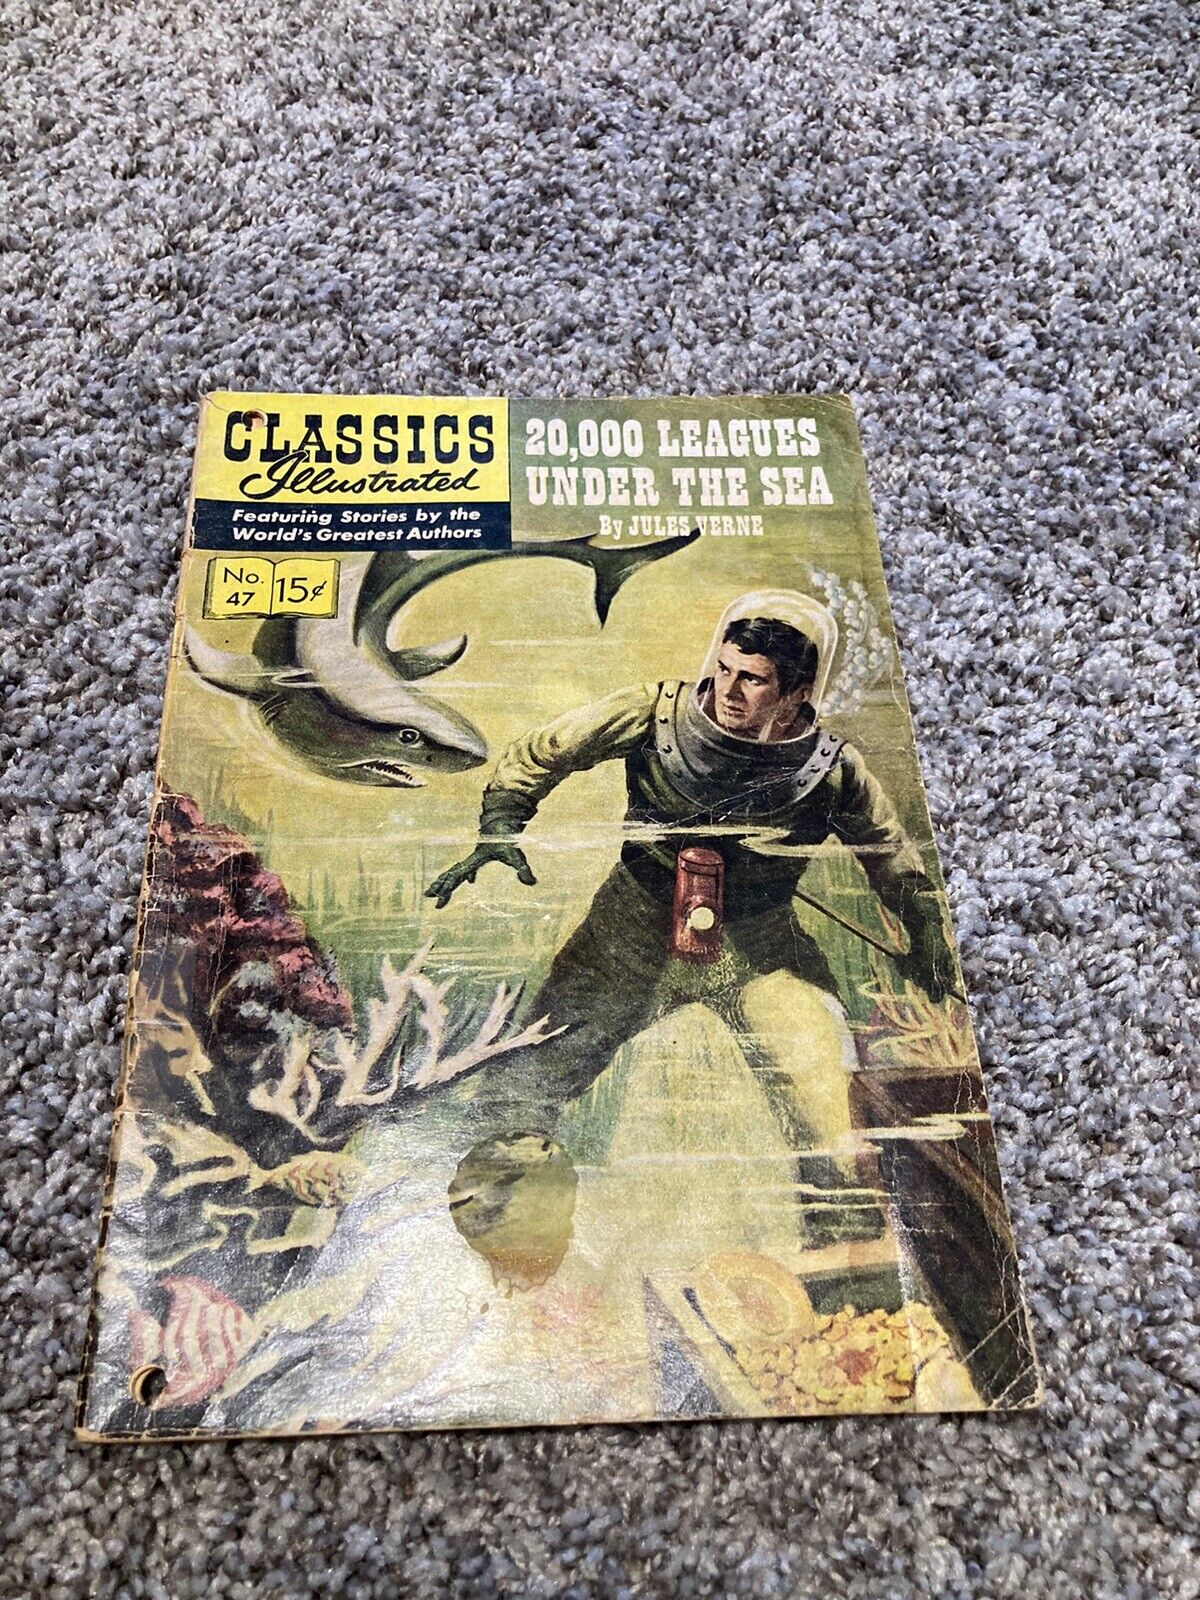 20,000 Leagues Under The Sea Classics Illustrated No 47 by Jules Verne